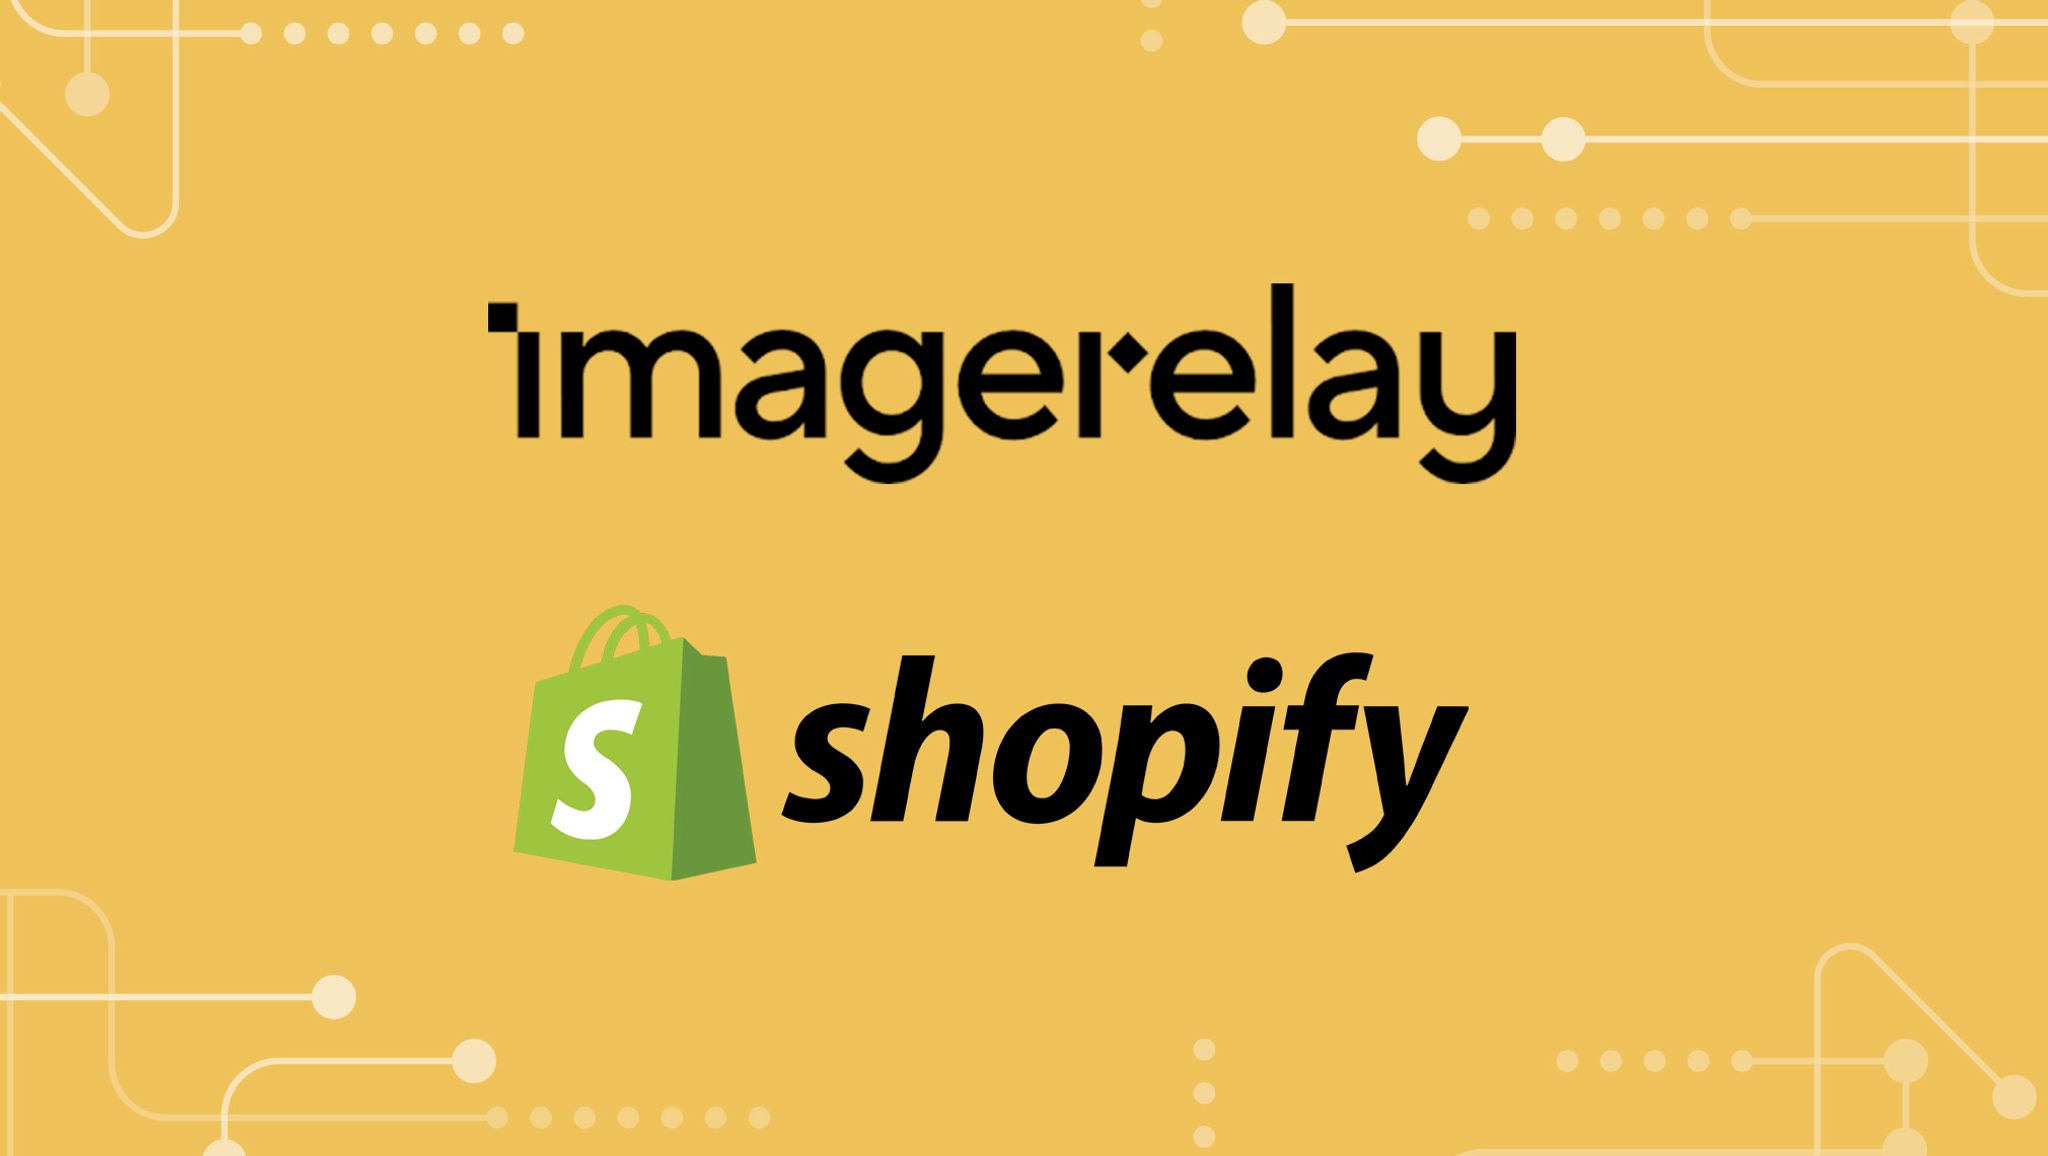 Image Relay and Shopify logos